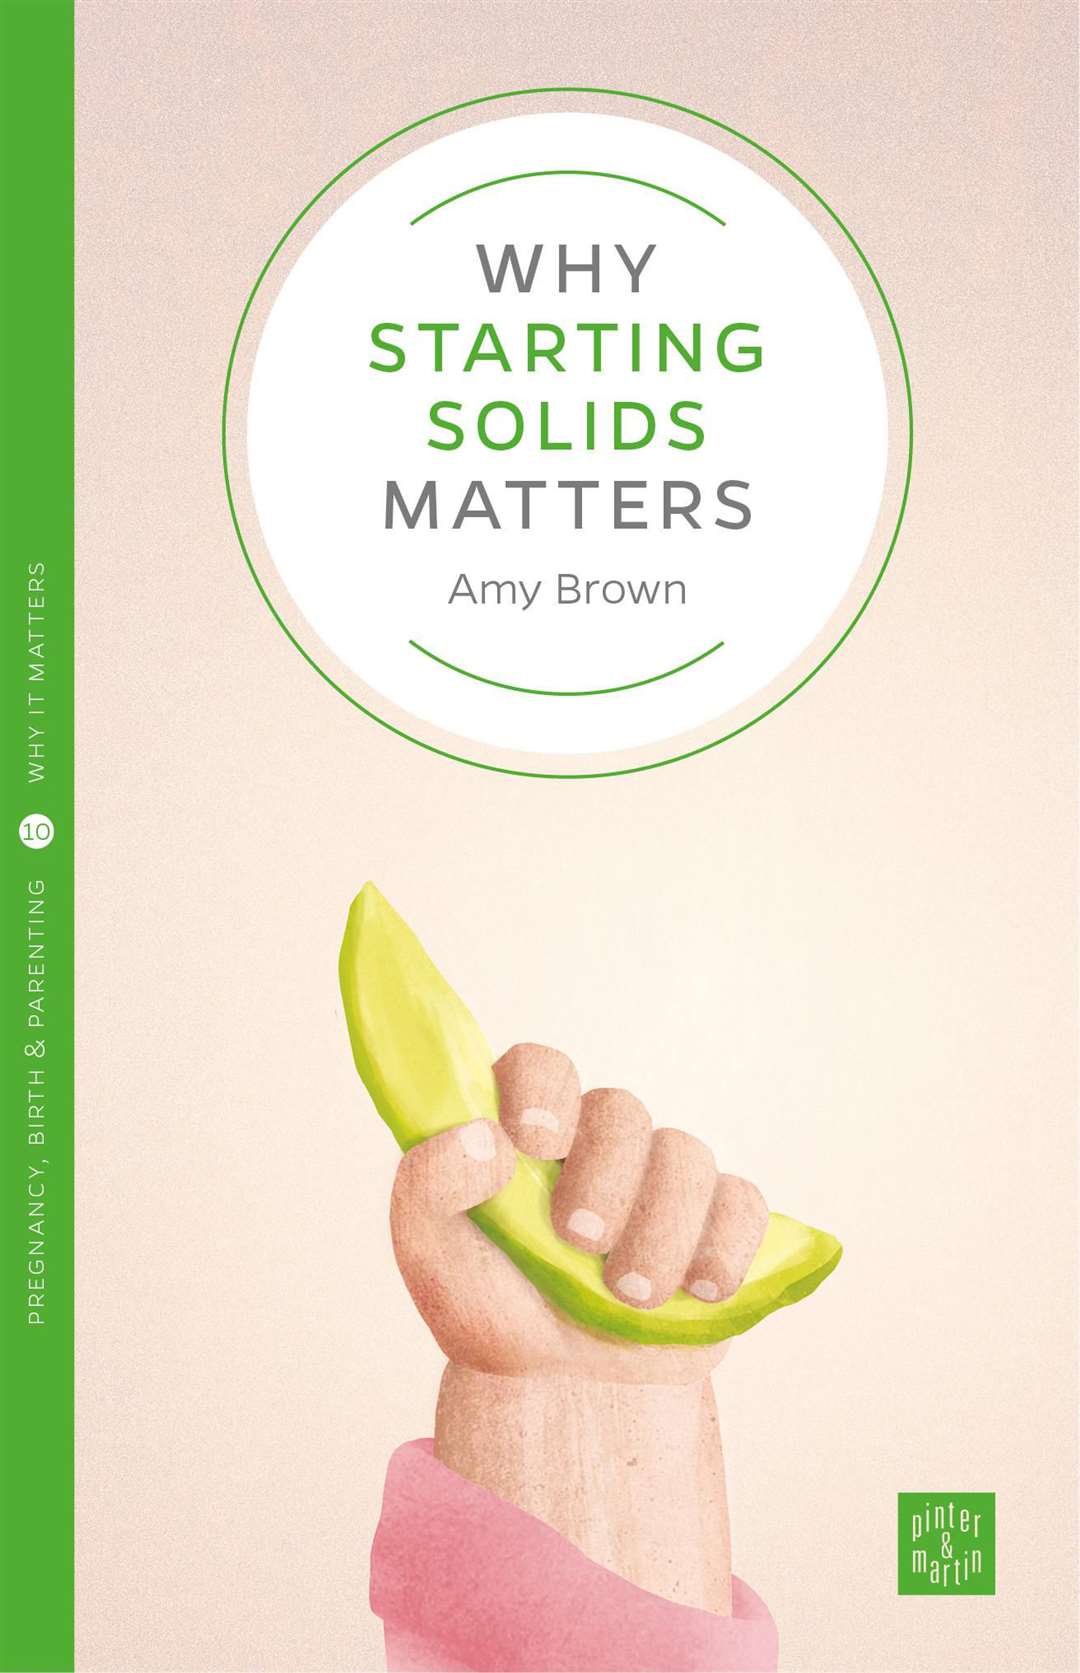 Why Starting Solids Matters (Pinter & Martin, £7.99)